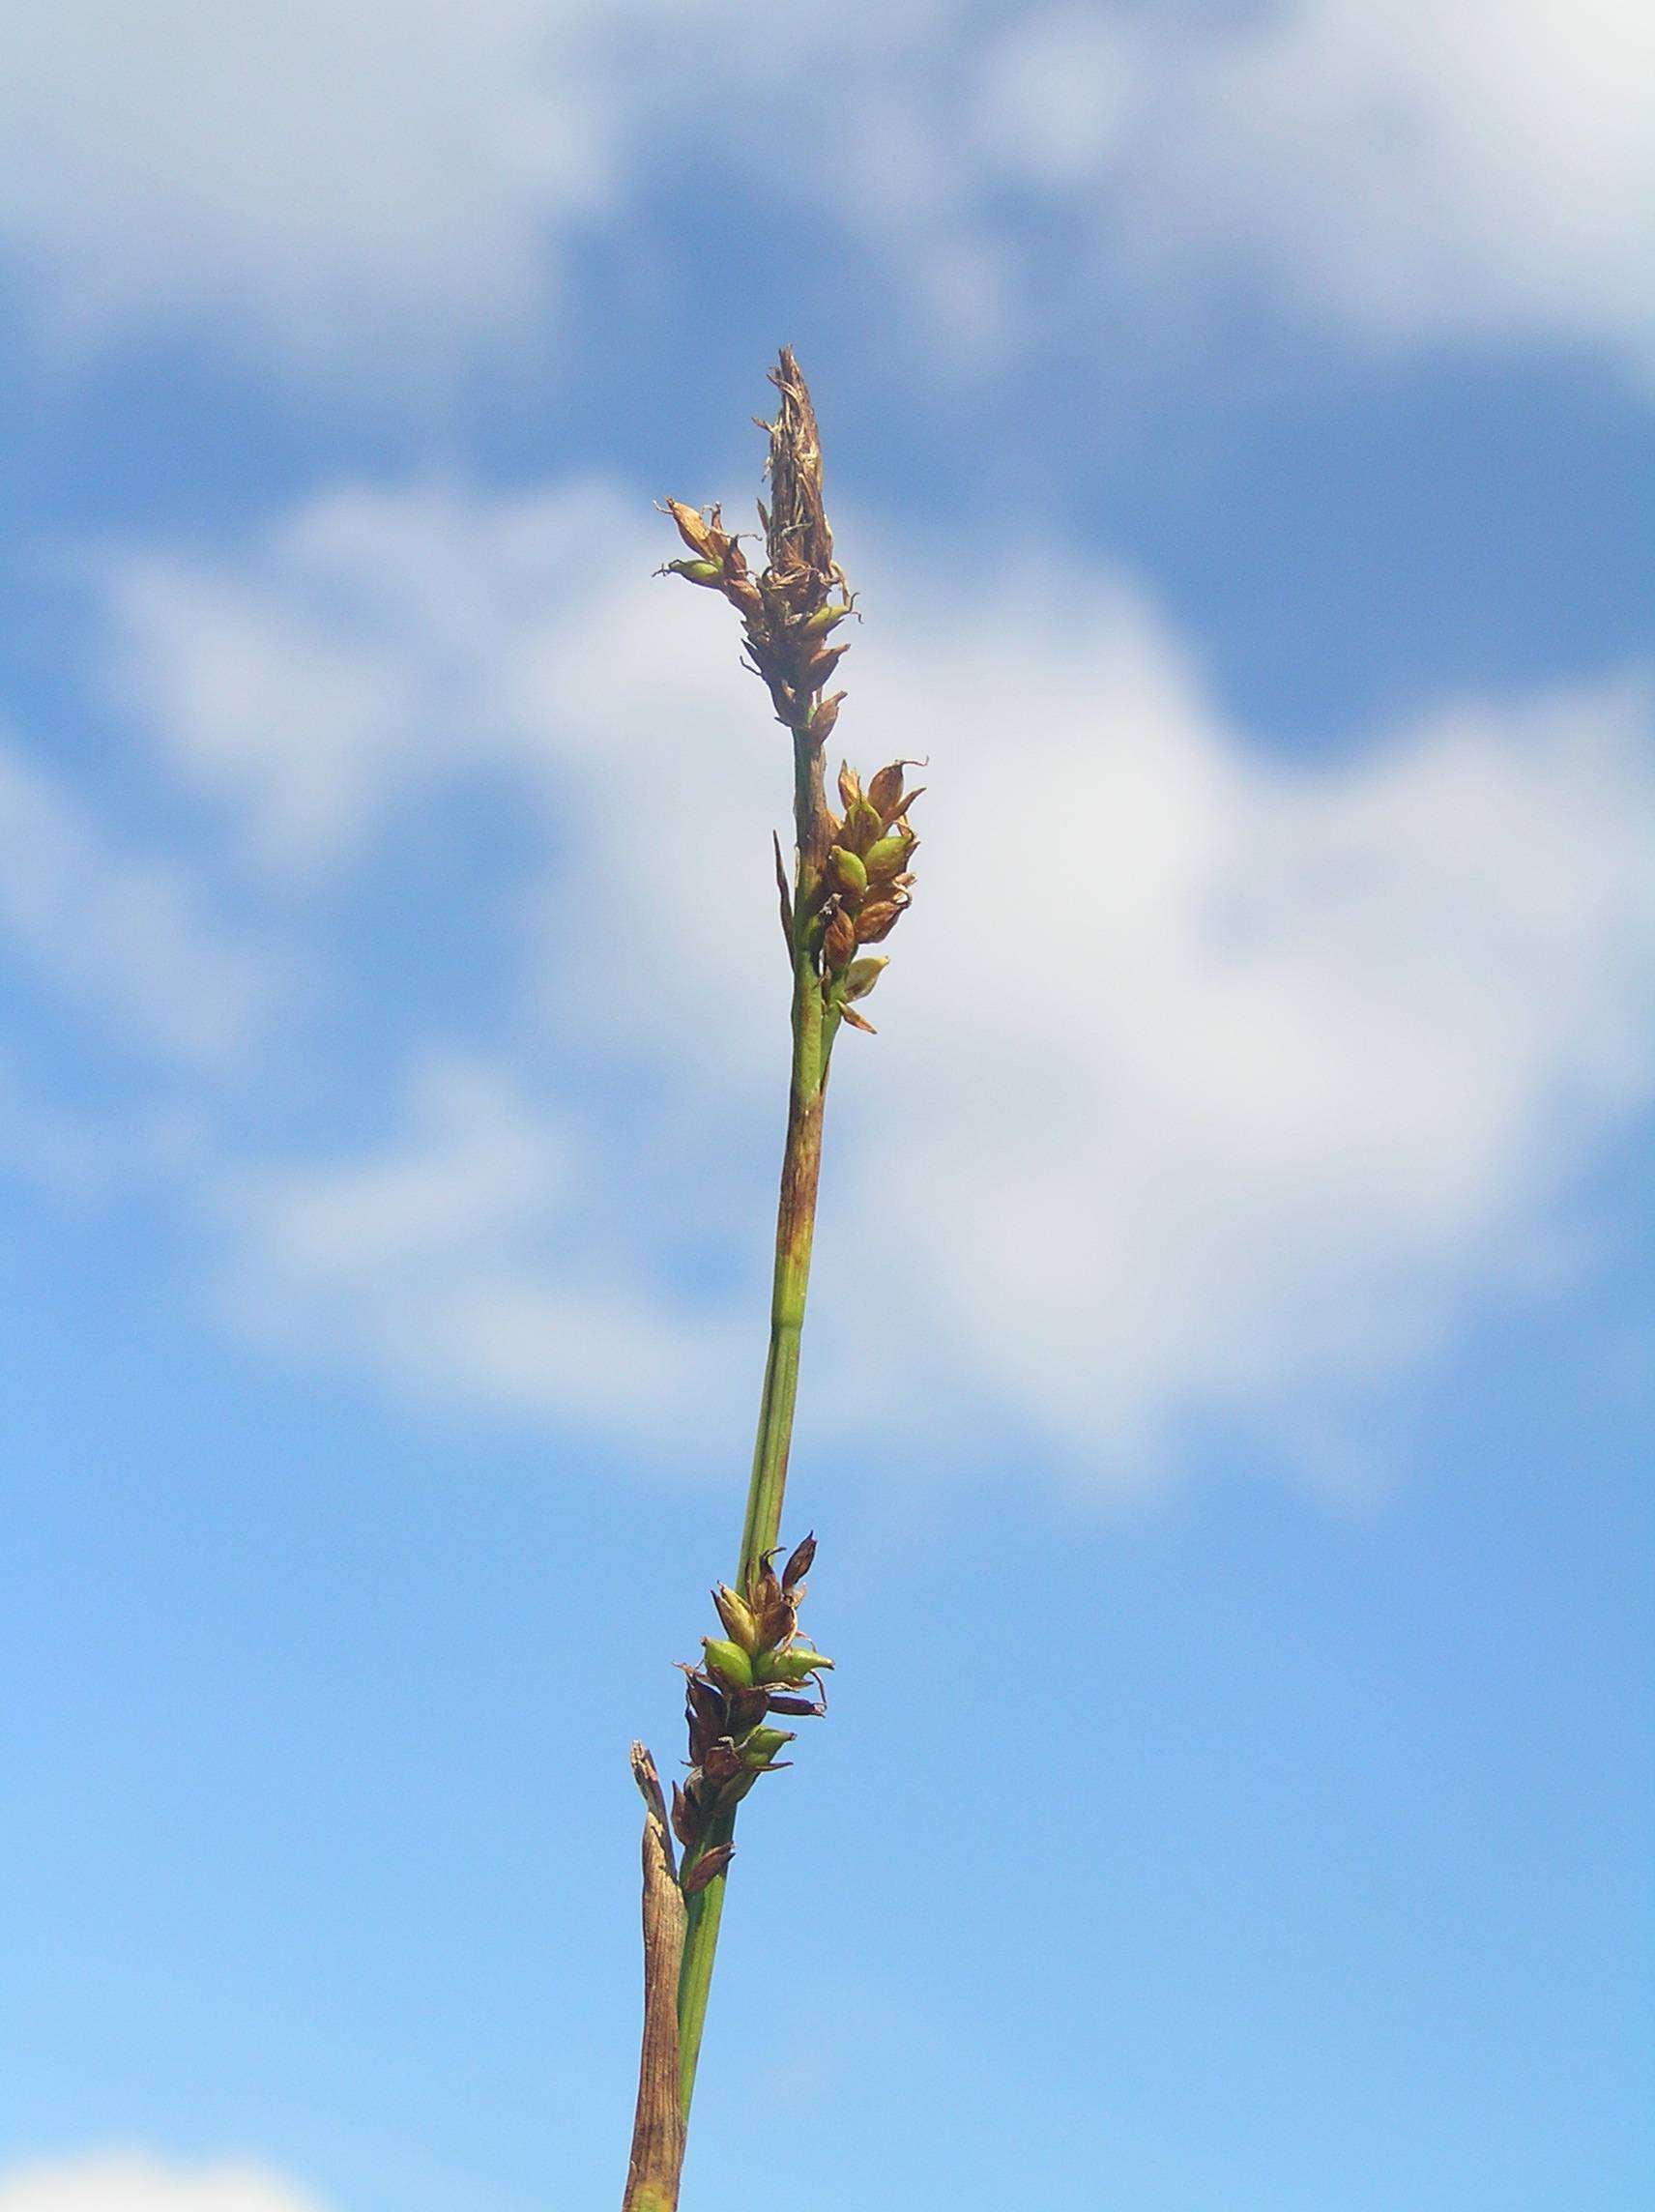 lime-brown spikelets with green-brown foliage